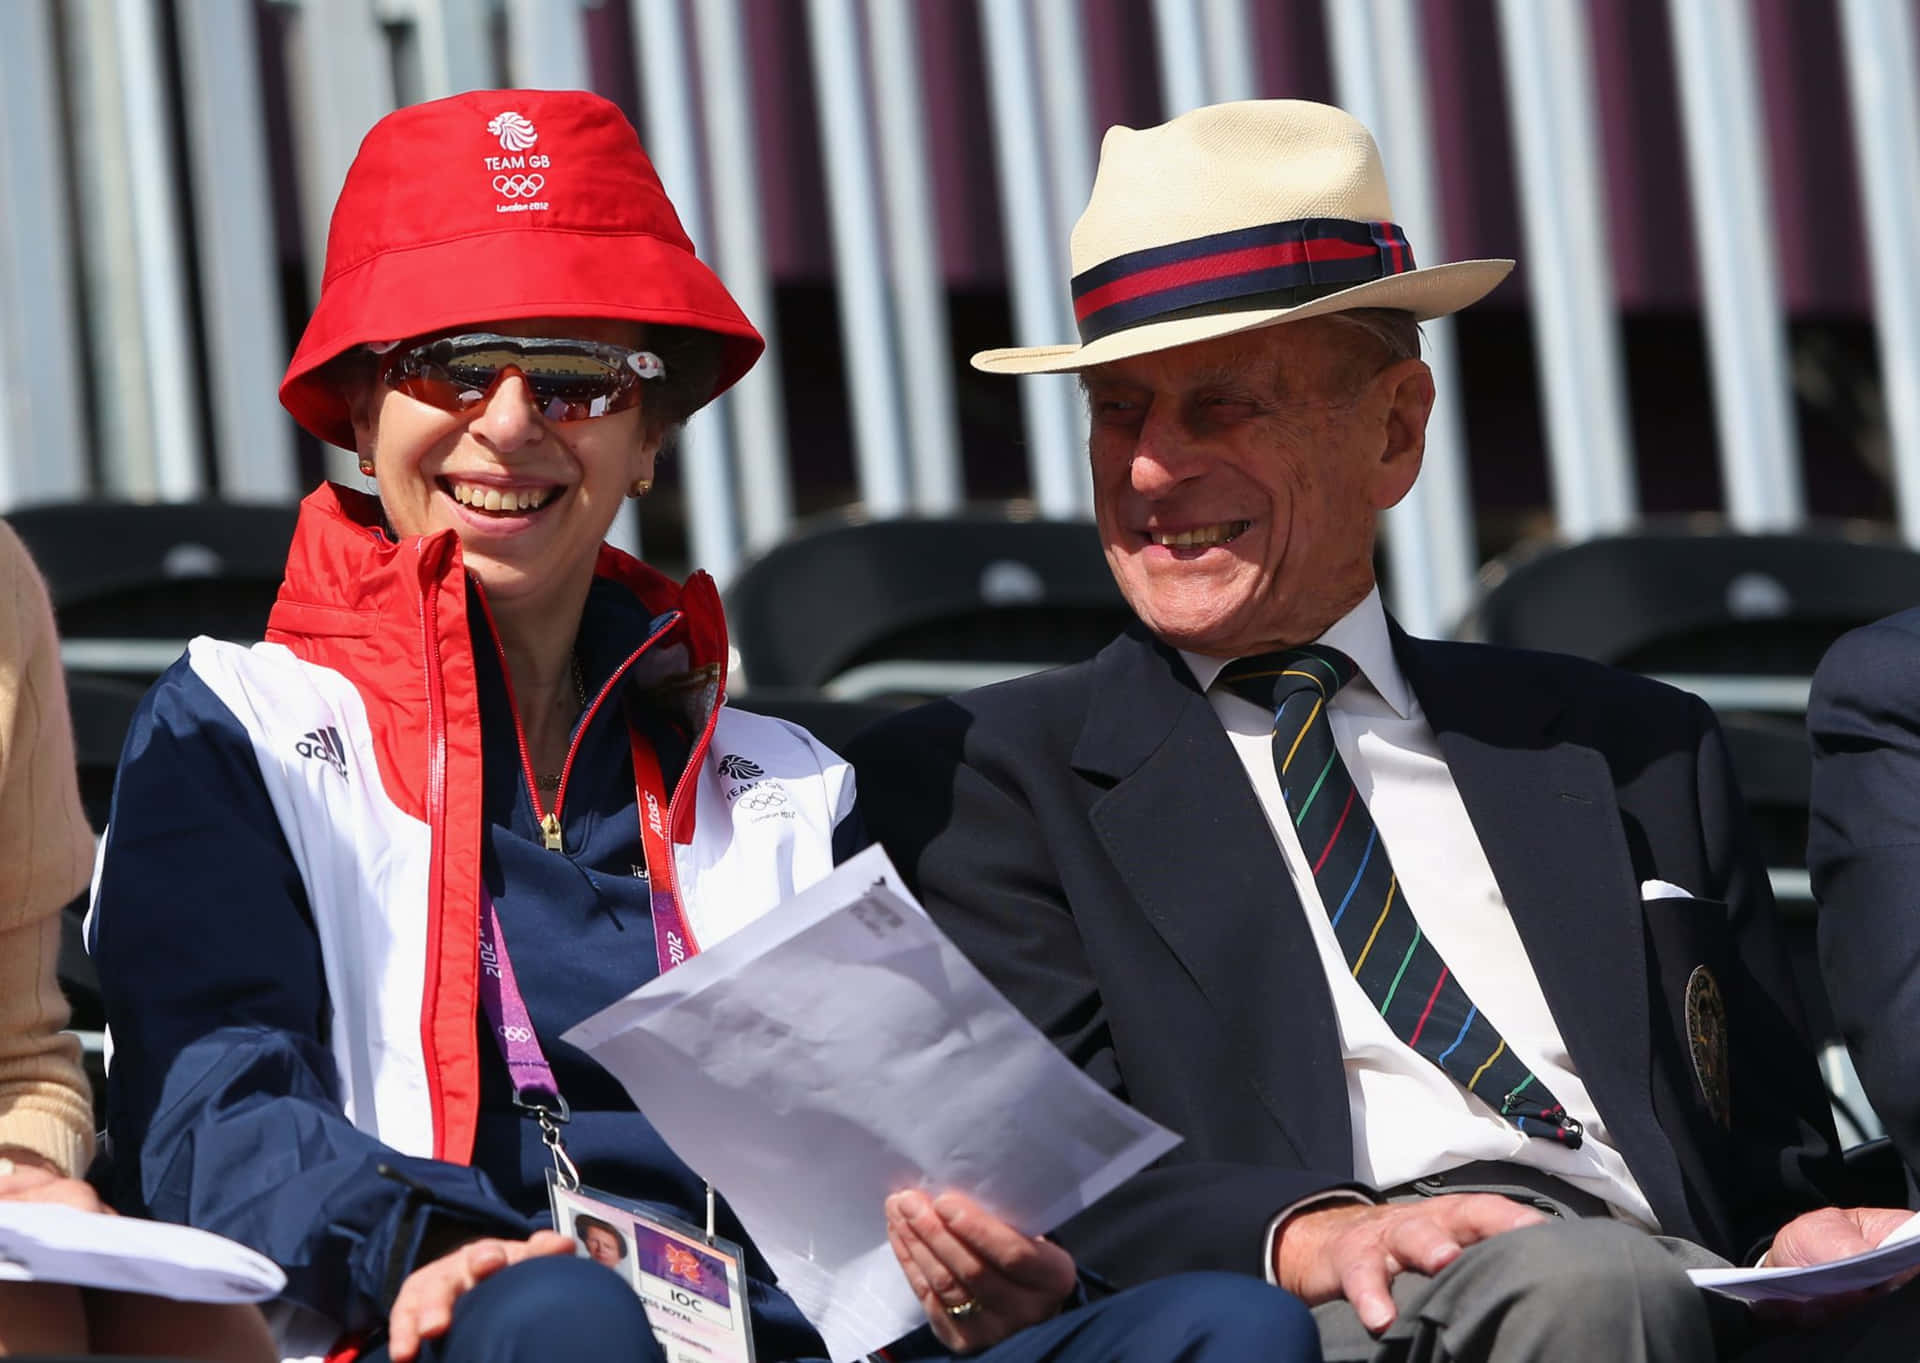 Princess Anne And Prince Philip At 2012 Olympics Wallpaper